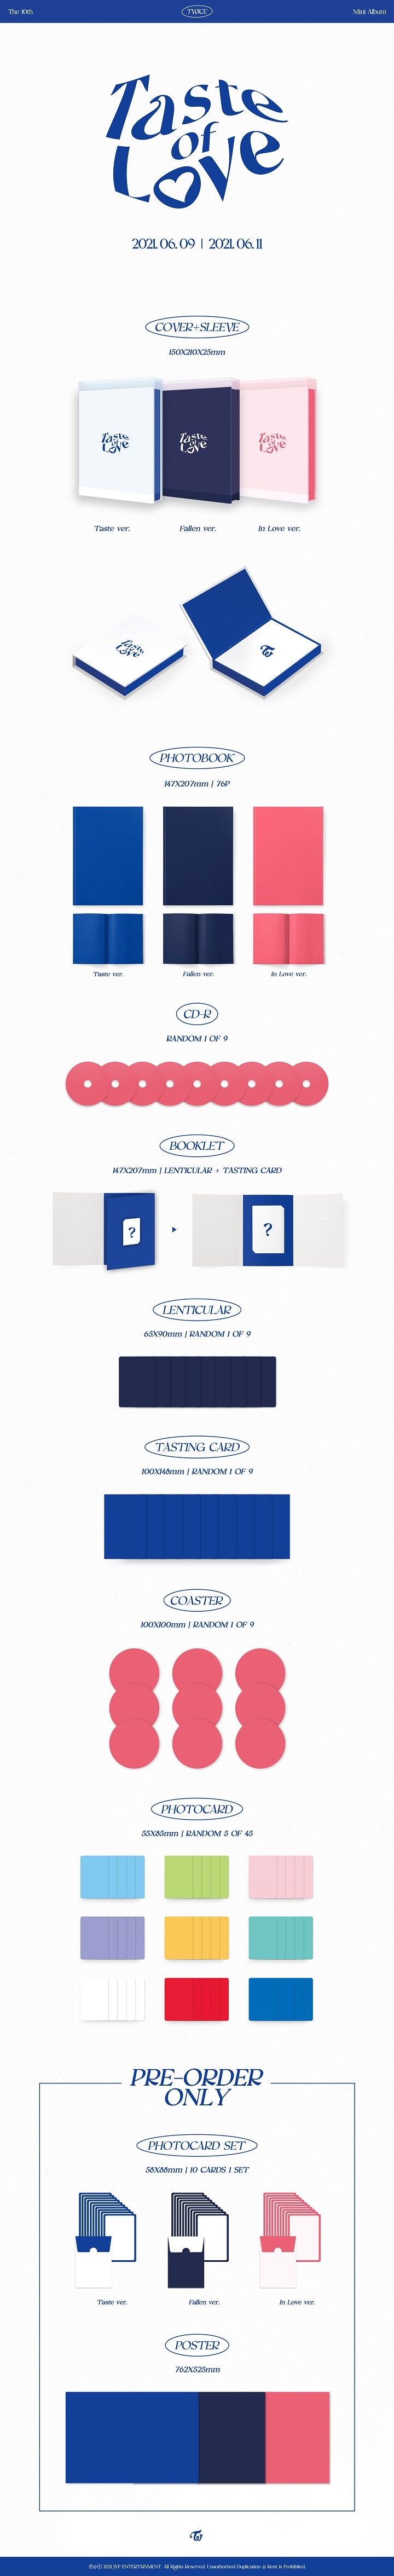 1 CD (random out of 9 kinds)
1 Photo Book (76 pages)
1 Booklet
1 Lenticular Card (random out of 9 kinds)
1 Tasting Card (r...